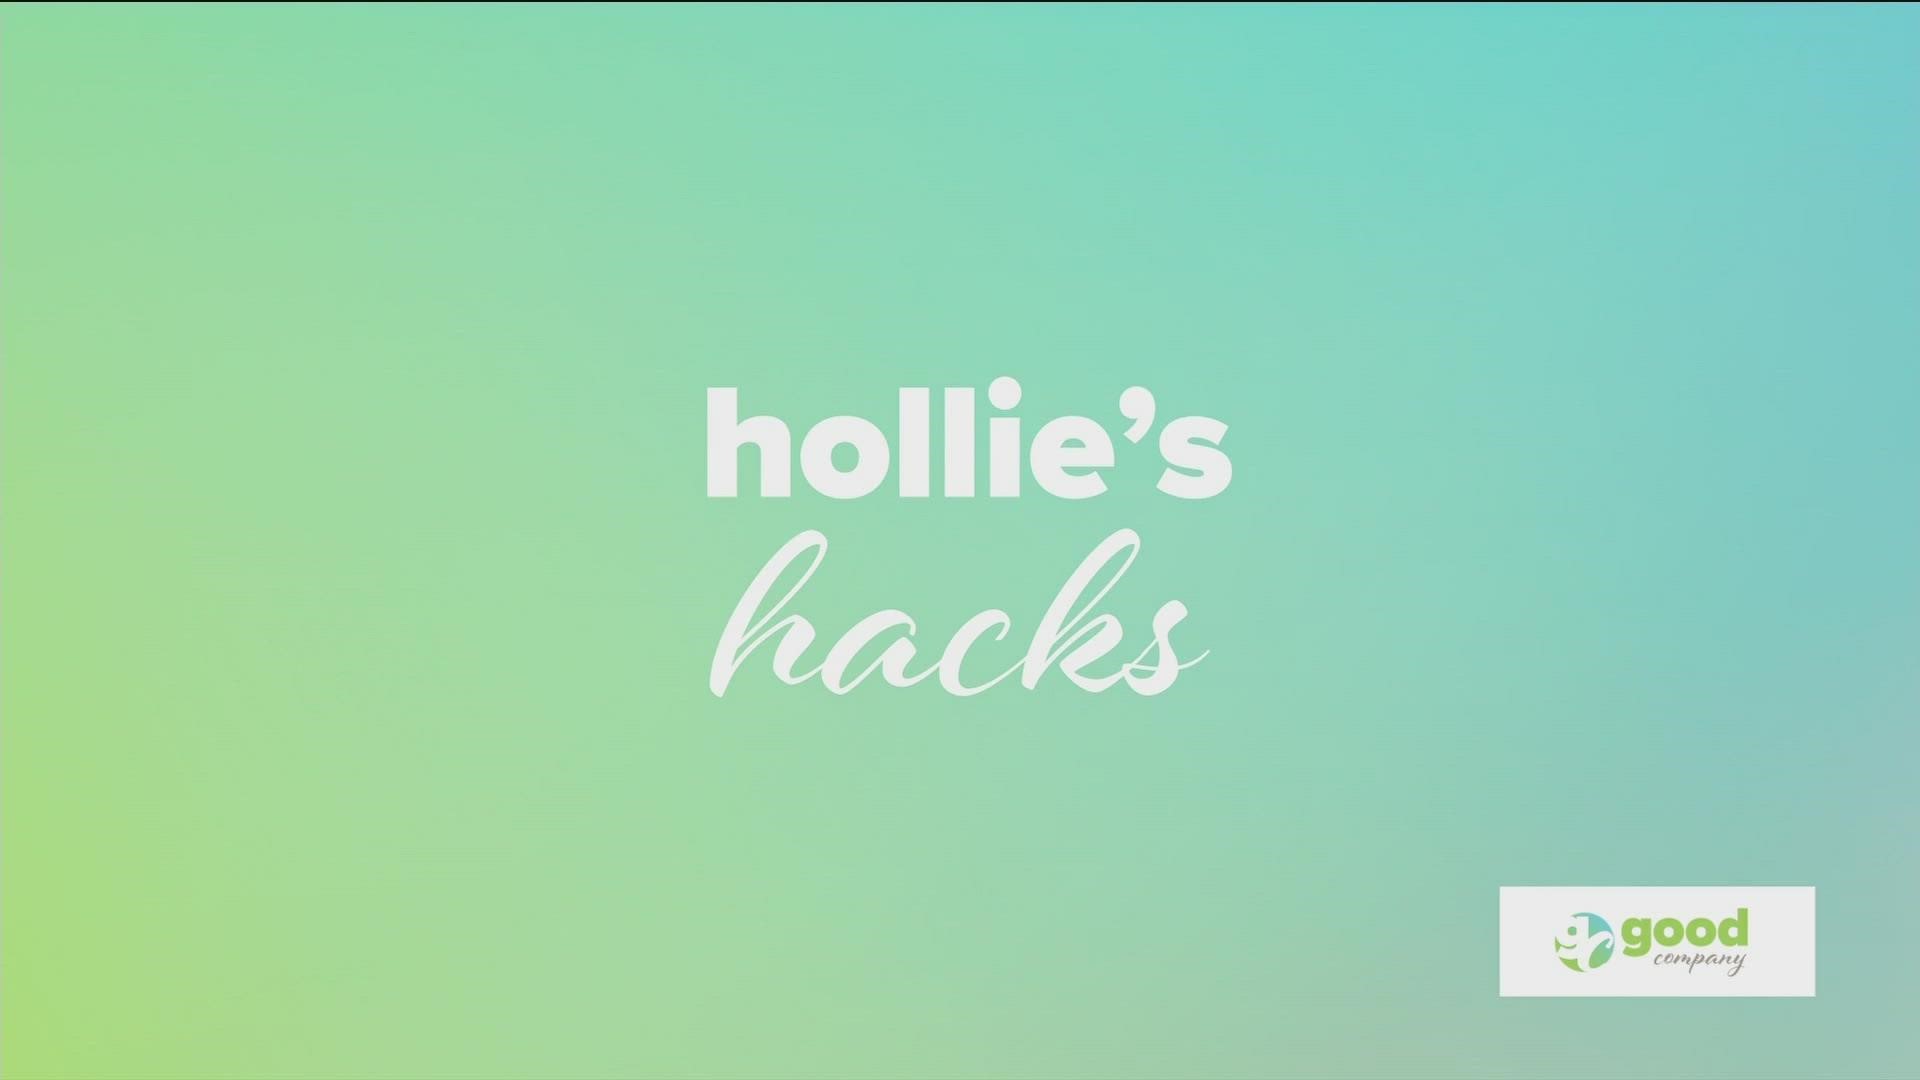 Hollie is back with another super cool hack to a clean table!